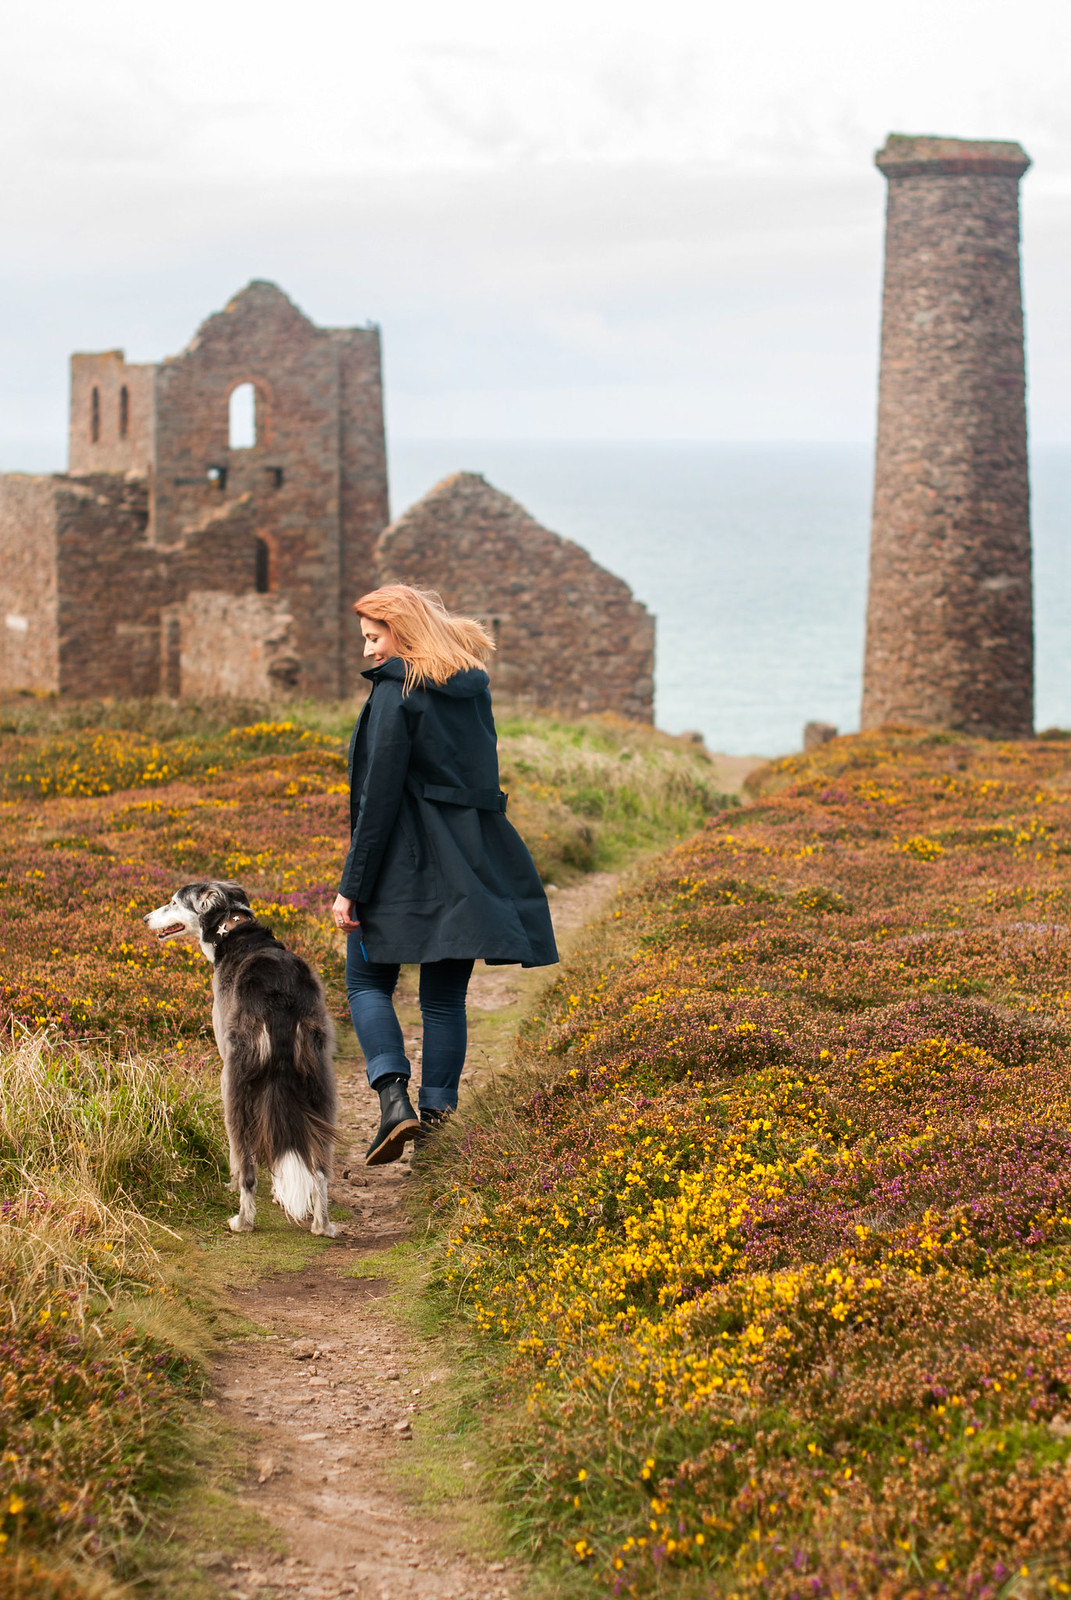 Stylish dressing for a rainy day - wearing AW17 Seasalt Cornwall in St Agnes, Cornwall: Longline navy raincoat grey Fair Isle sweater jumper blue corduroy trousers navy Chelsea boots | Not Dressed As Lamb, over 40 style